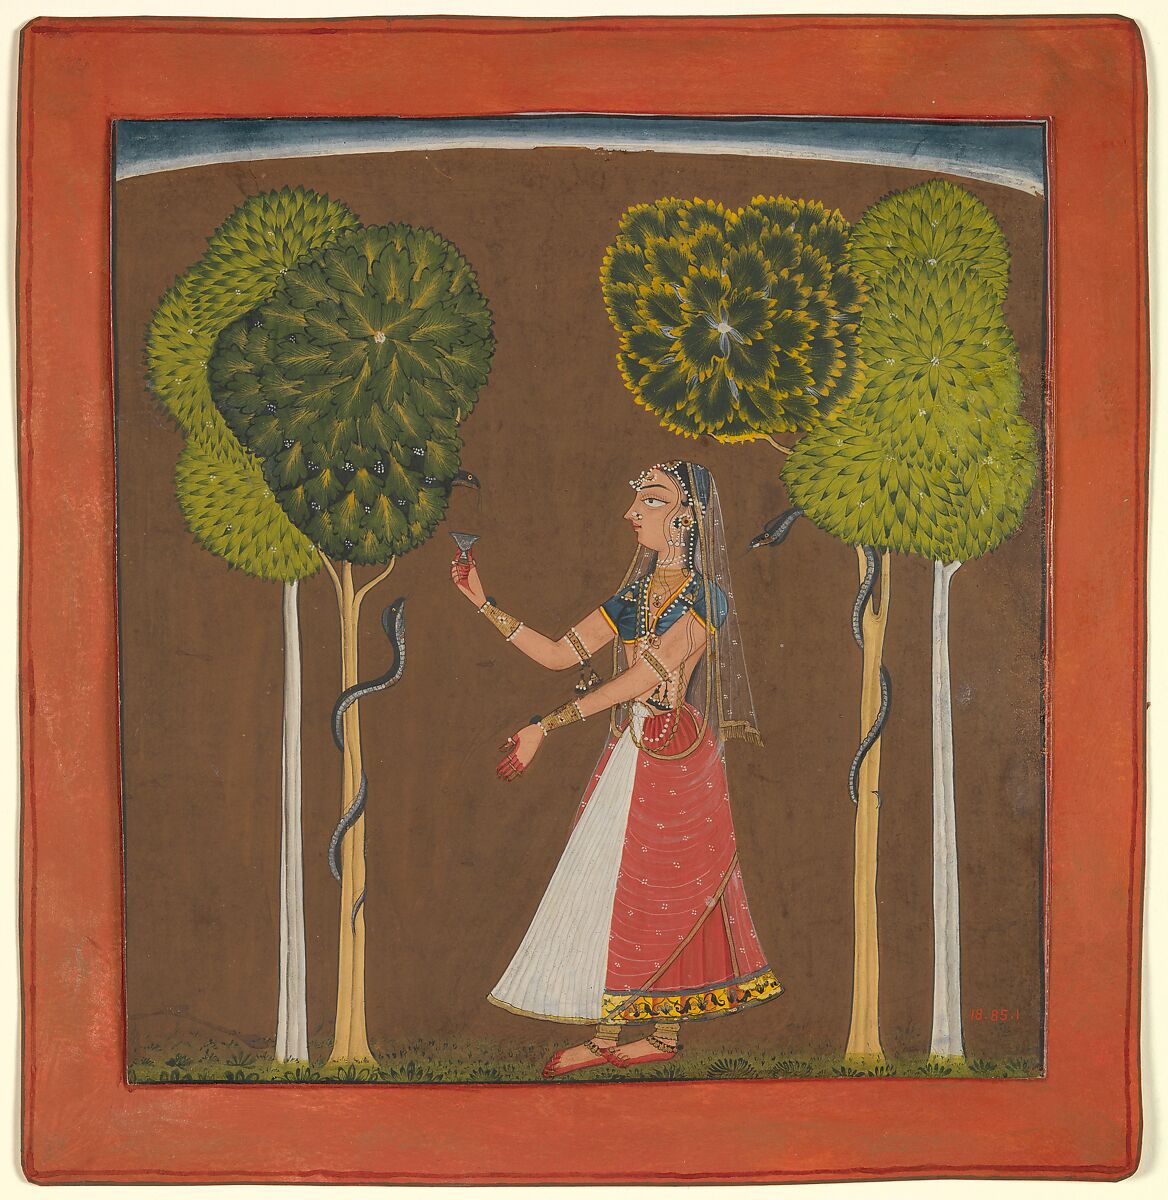 Ragini, possibly Asavari: Folio from a Ragamala Series, Ink and opaque watercolor on paper, India (Himachal Pradesh, Mankot) 